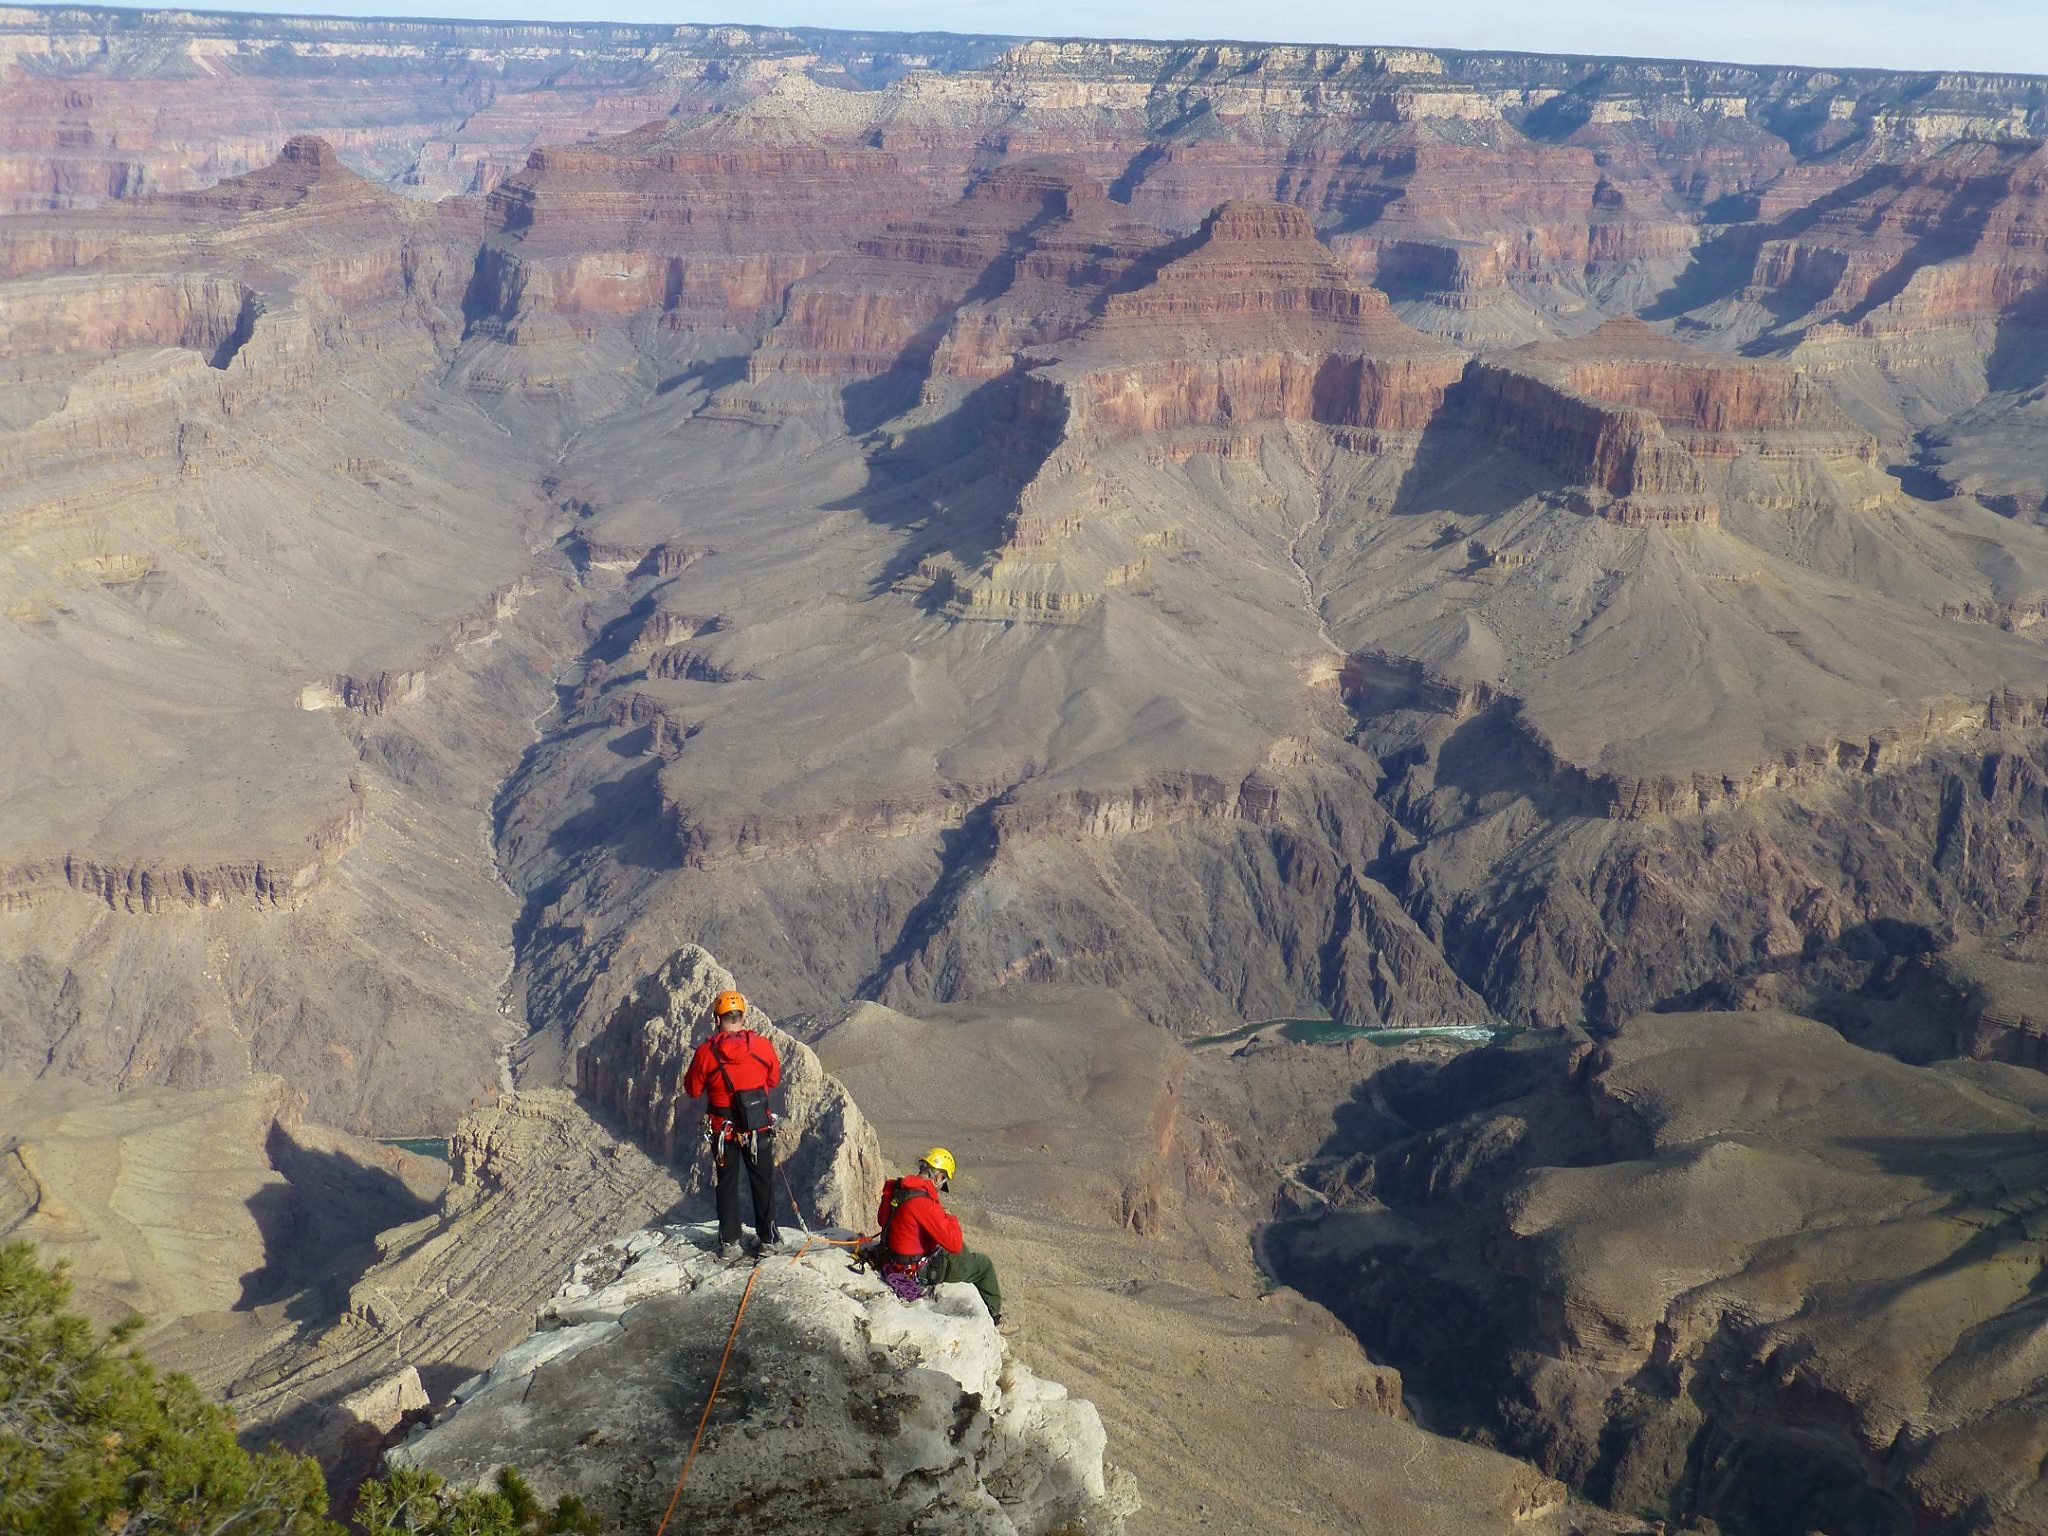 Two rangers scope on a ledge on the rim of Grand Canyon